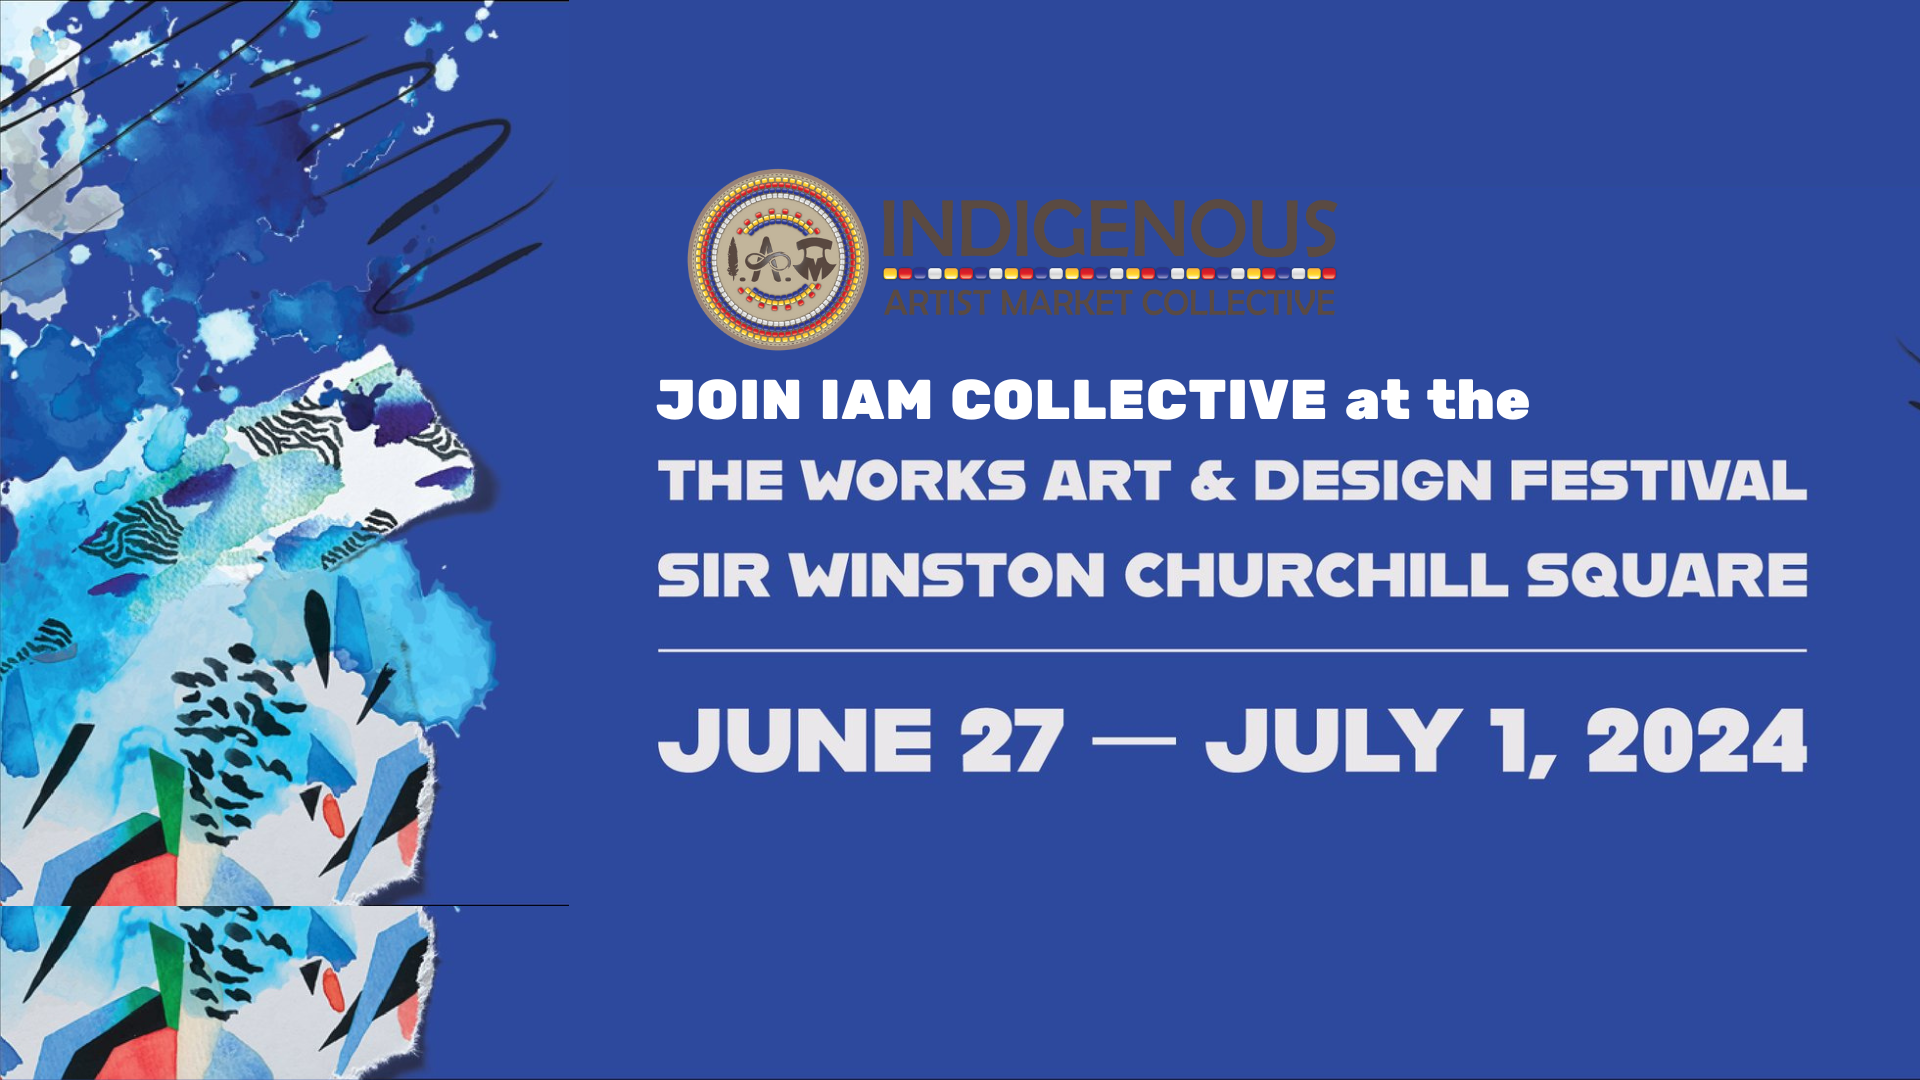 Featured image for “IAM Collective at the WORKS ART & DESIGN Festival June 27-July 1”